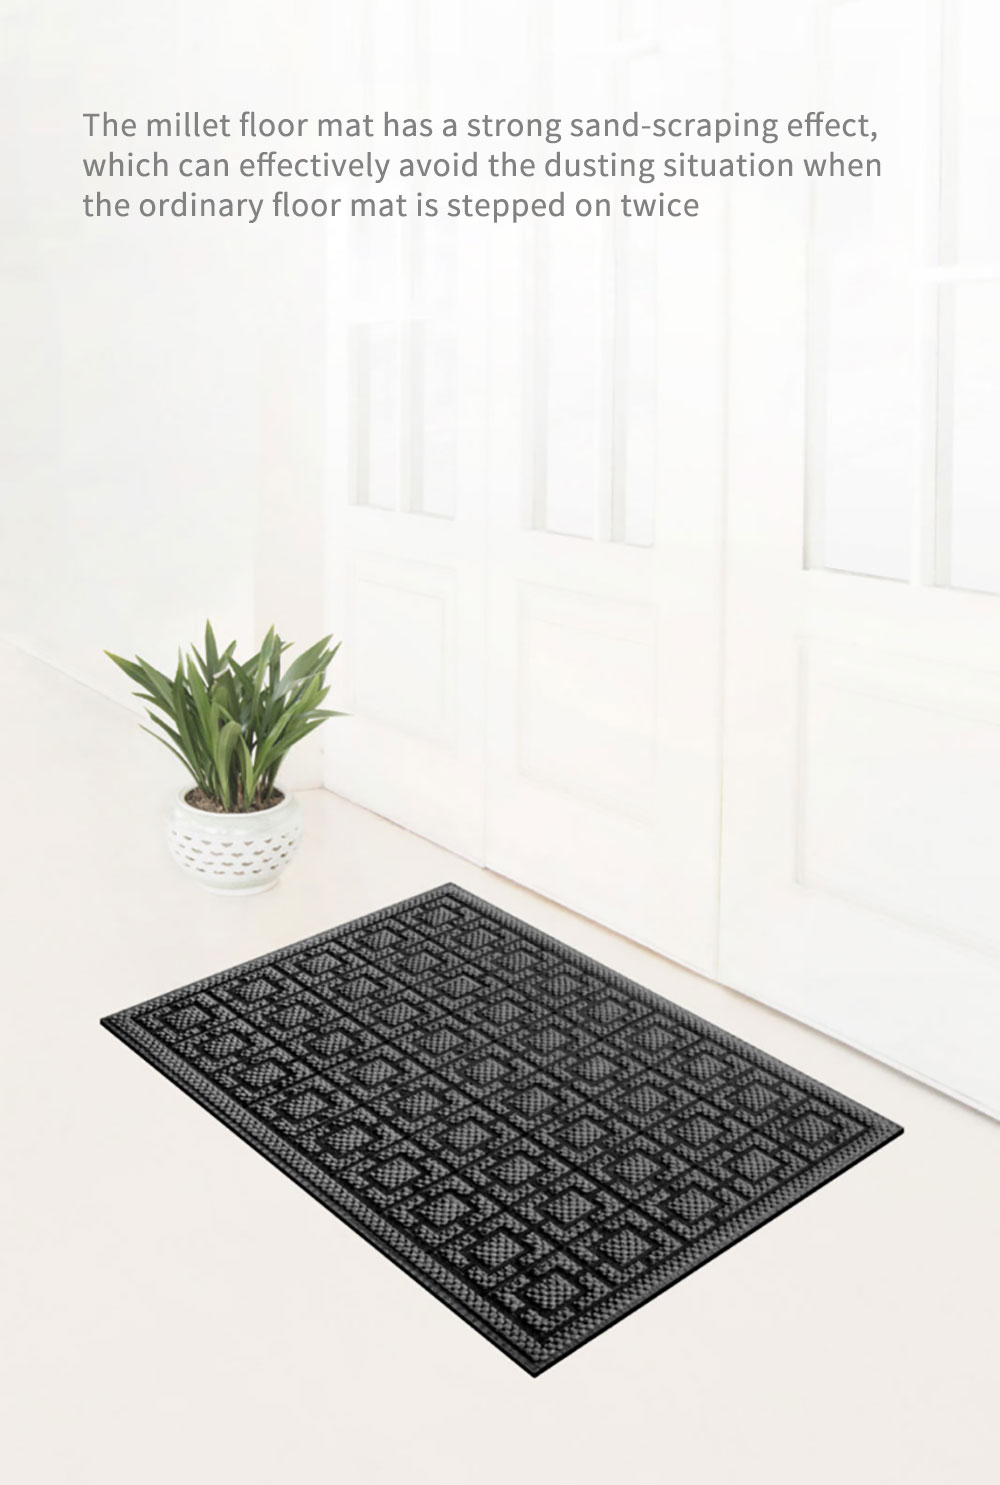 Pineapple--Square-Version-Special-Dust-Floor-Mat-Coffee-and-Gray-Carpet-1327673-2